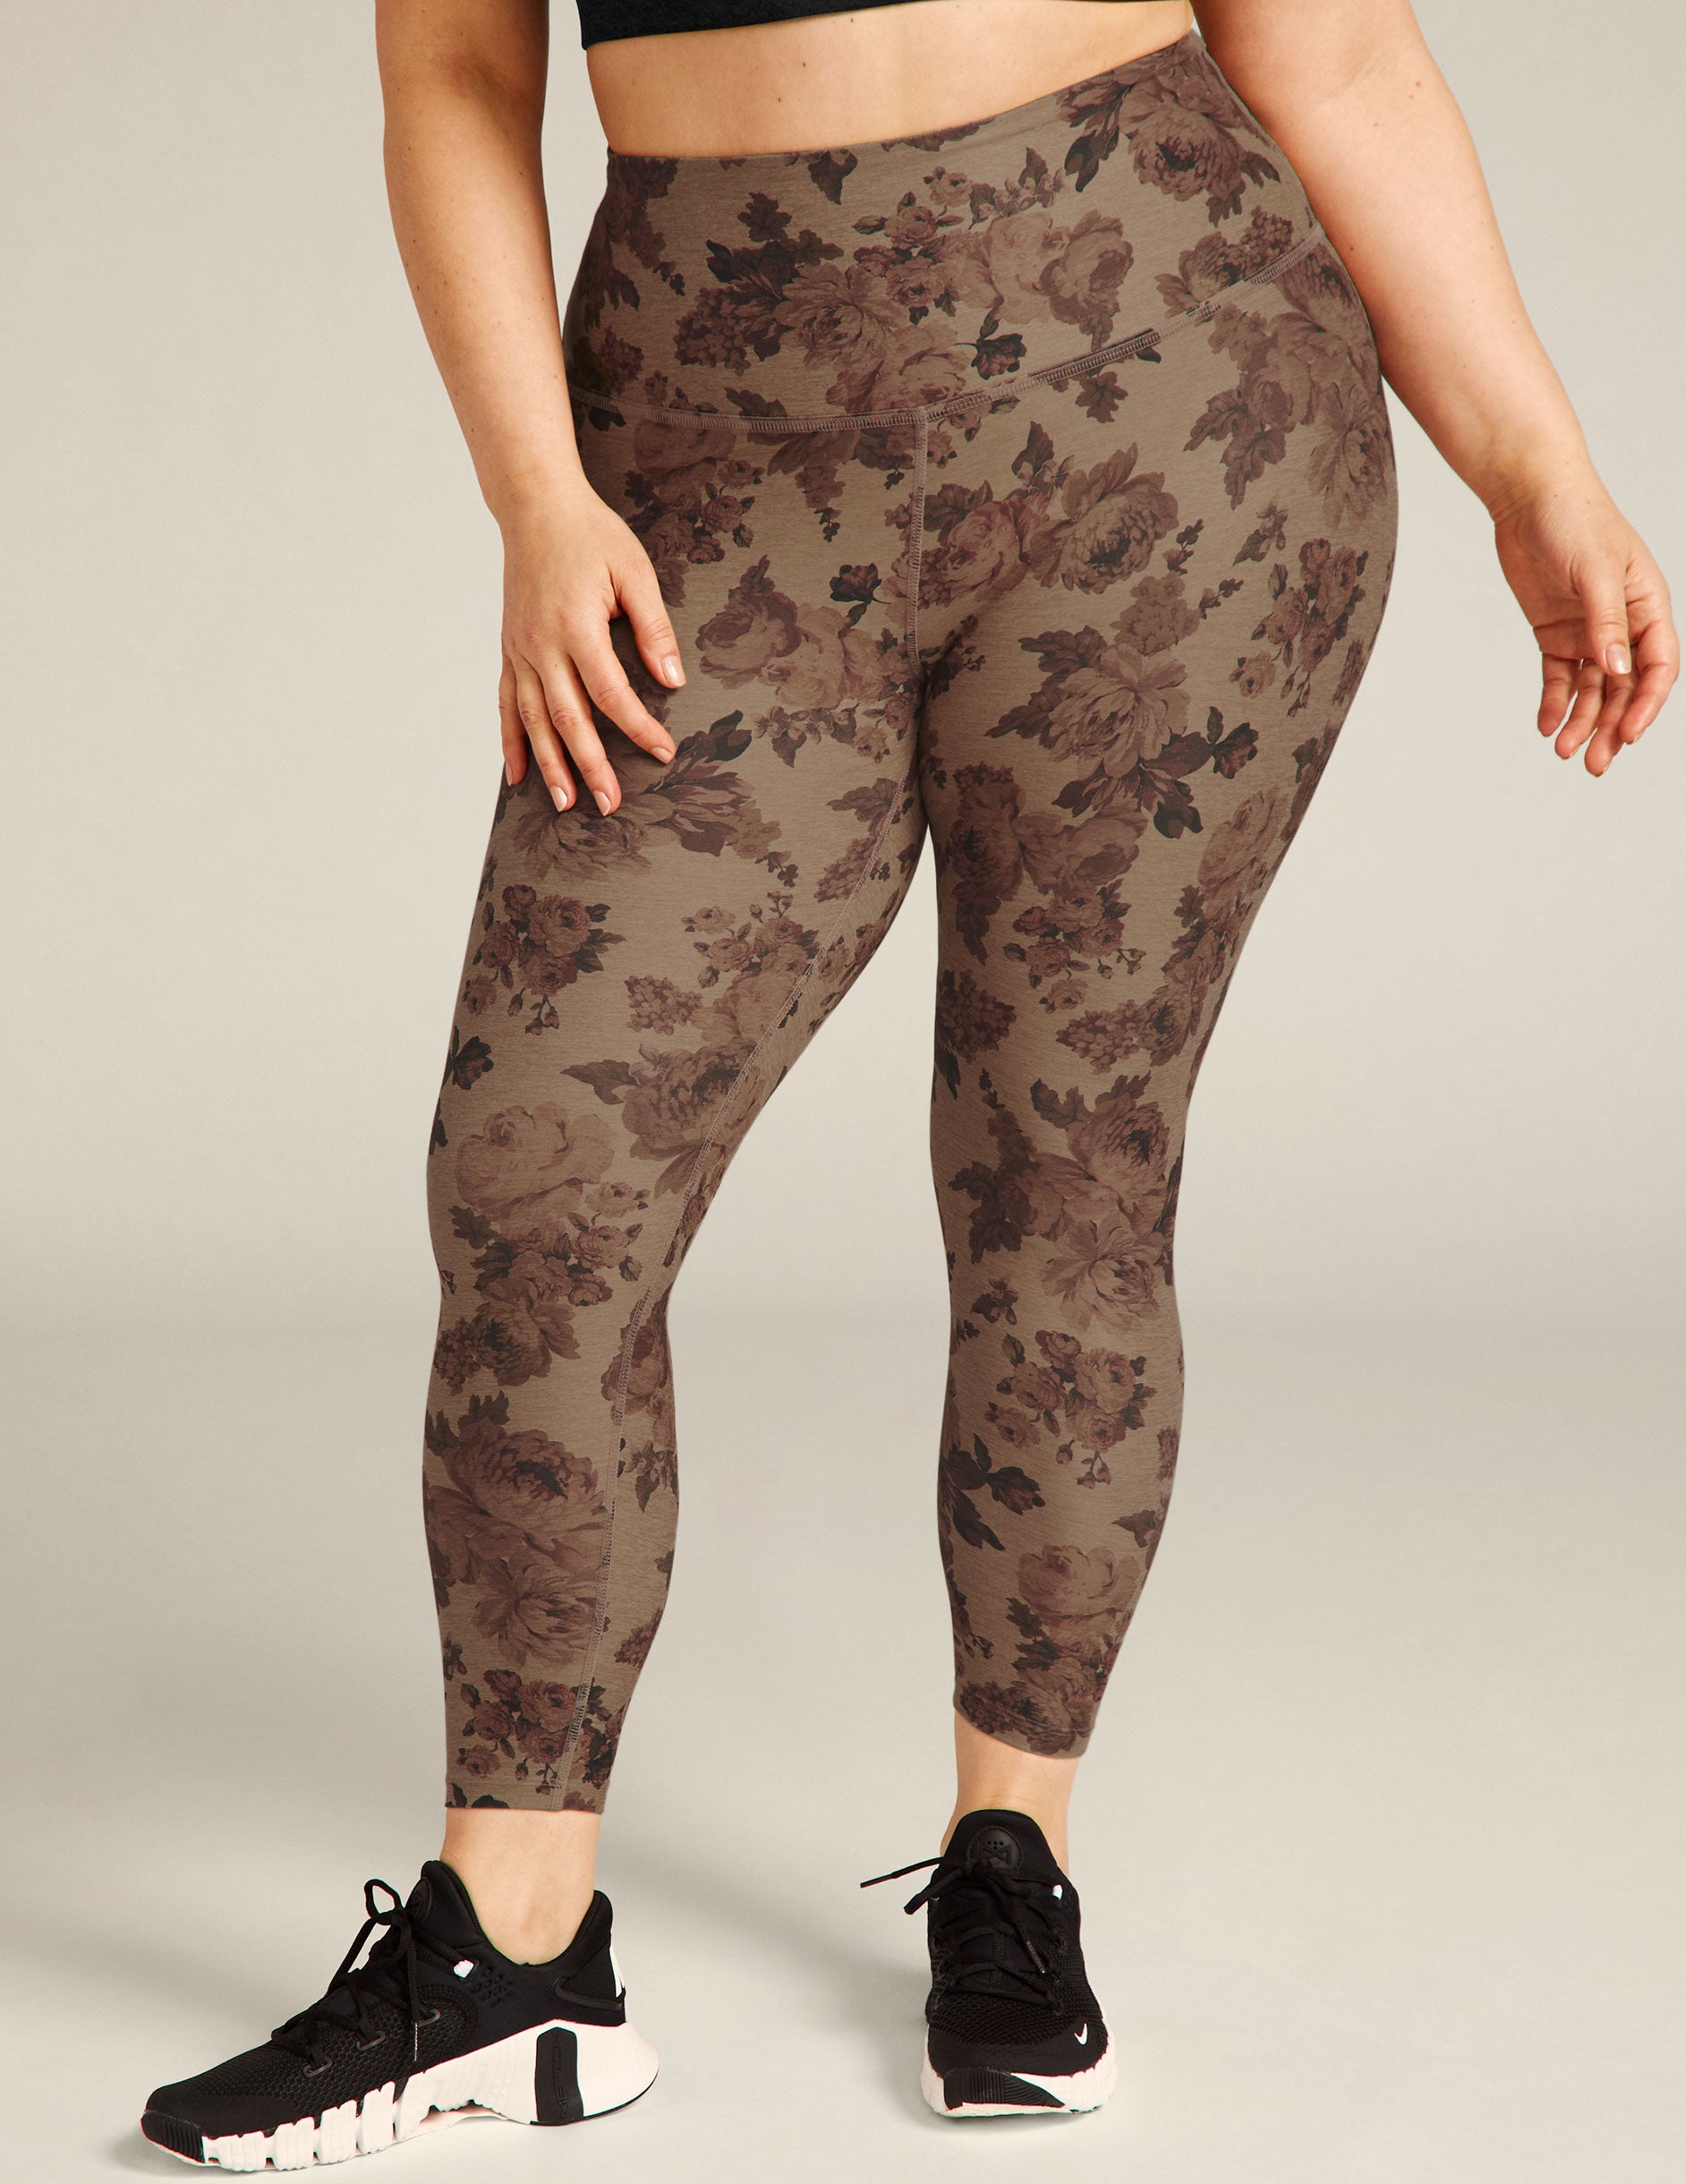 Beyond Yoga High-Waisted Midi Leggings  Anthropologie Japan - Women's  Clothing, Accessories & Home